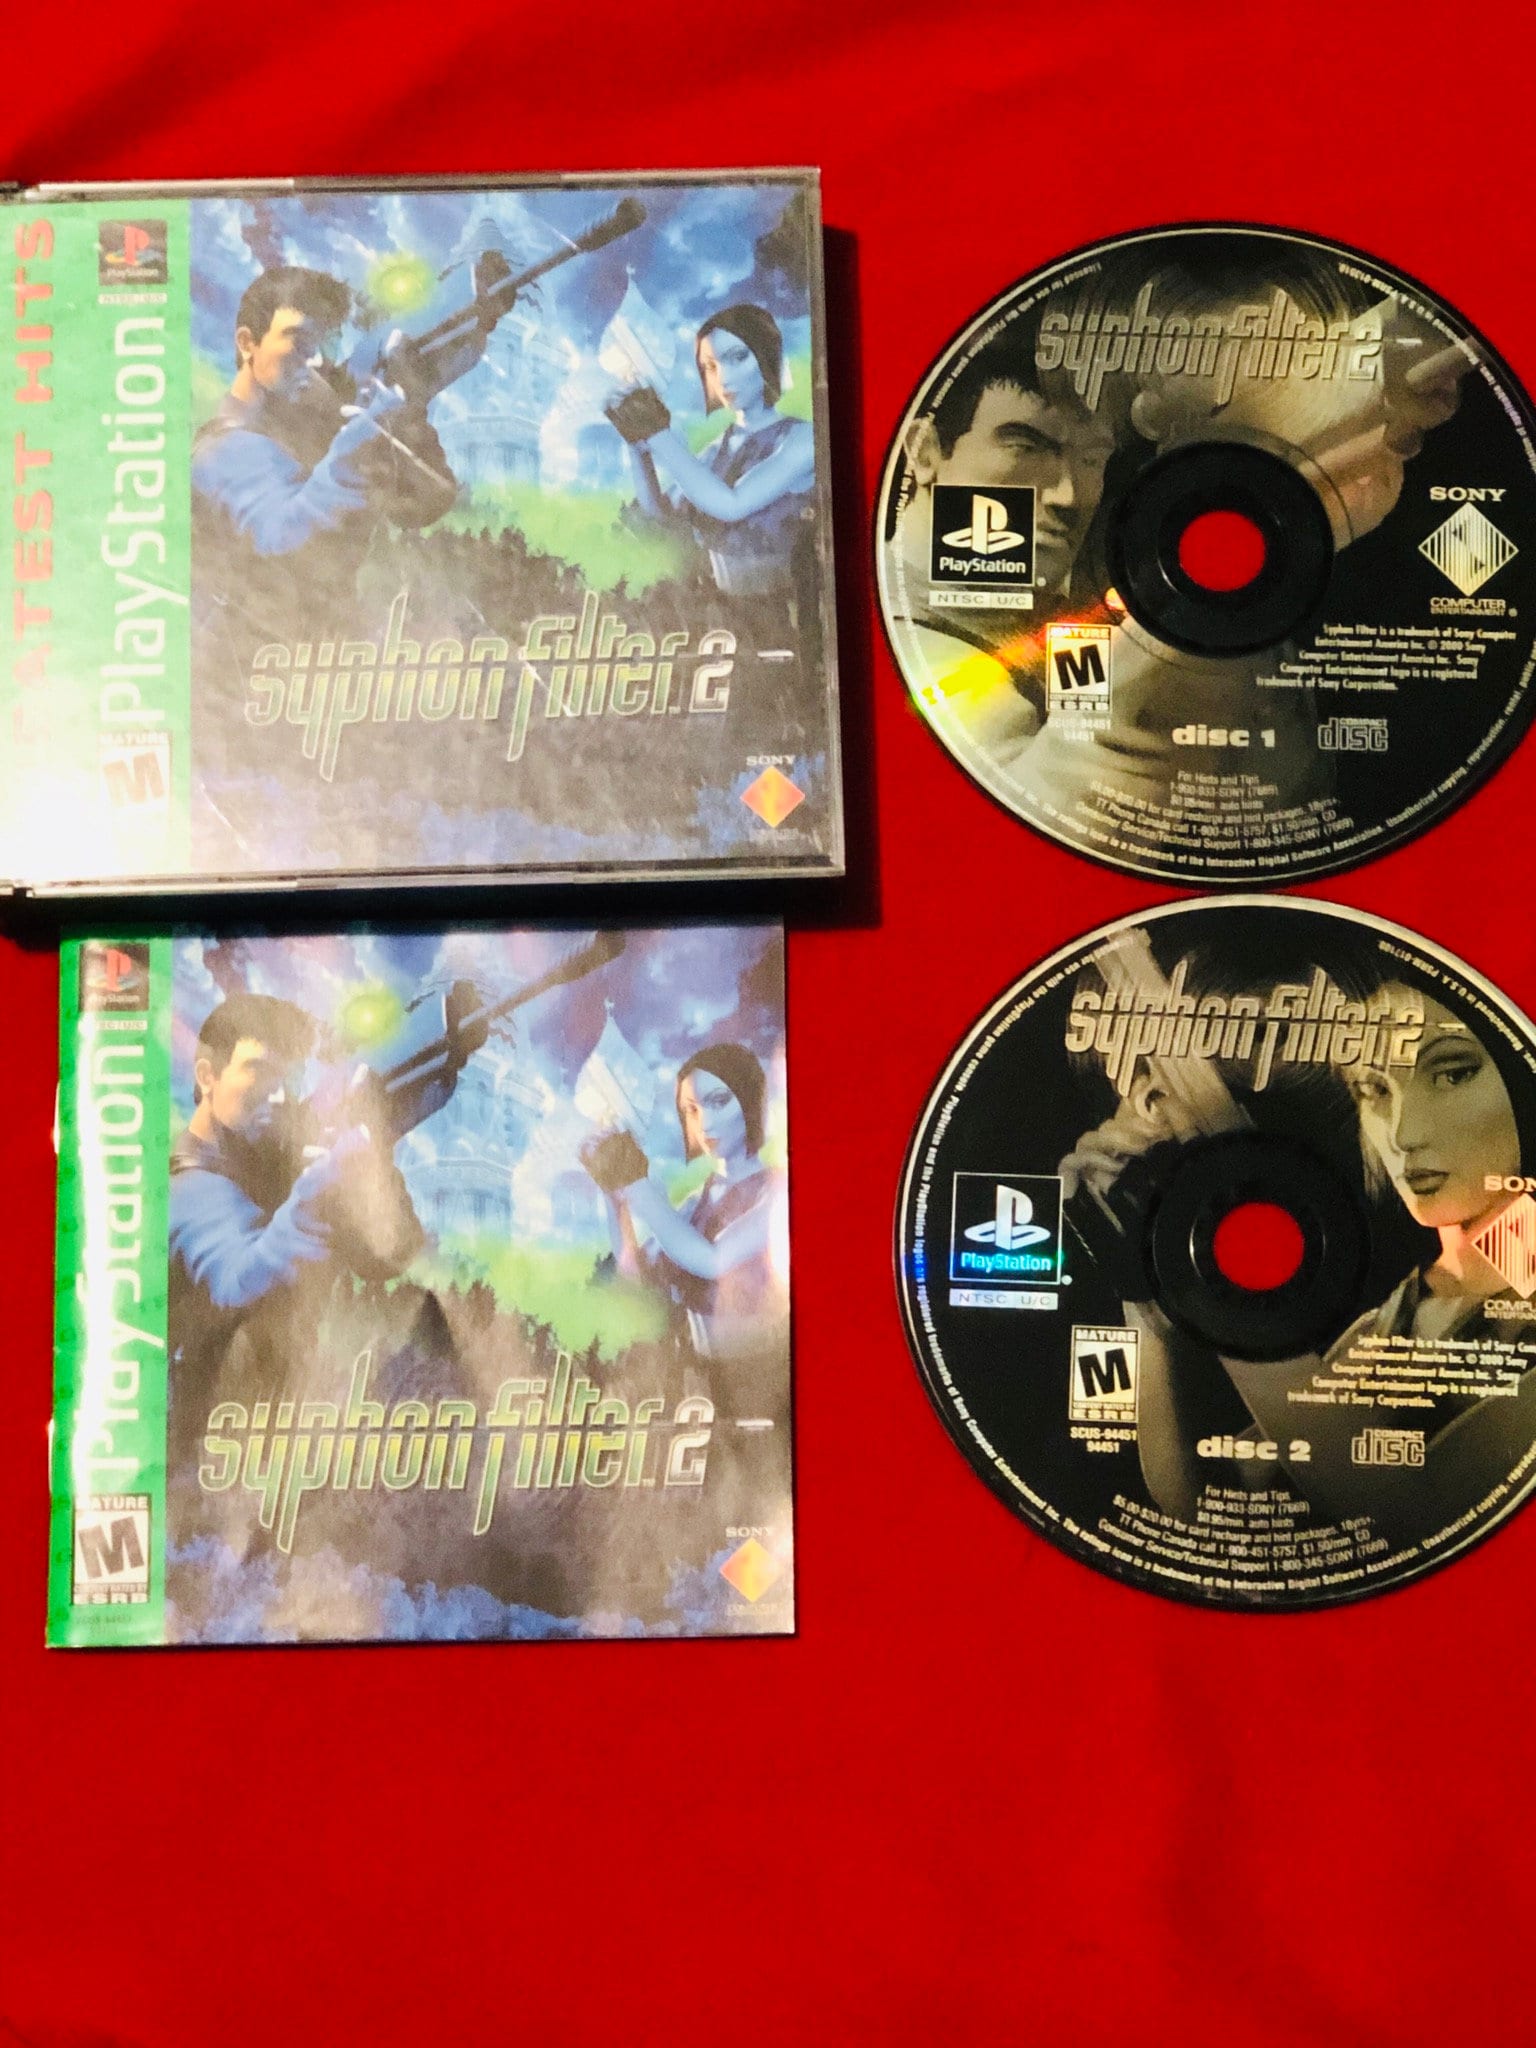 Syphon Filter - Retro Game Cases 🕹️